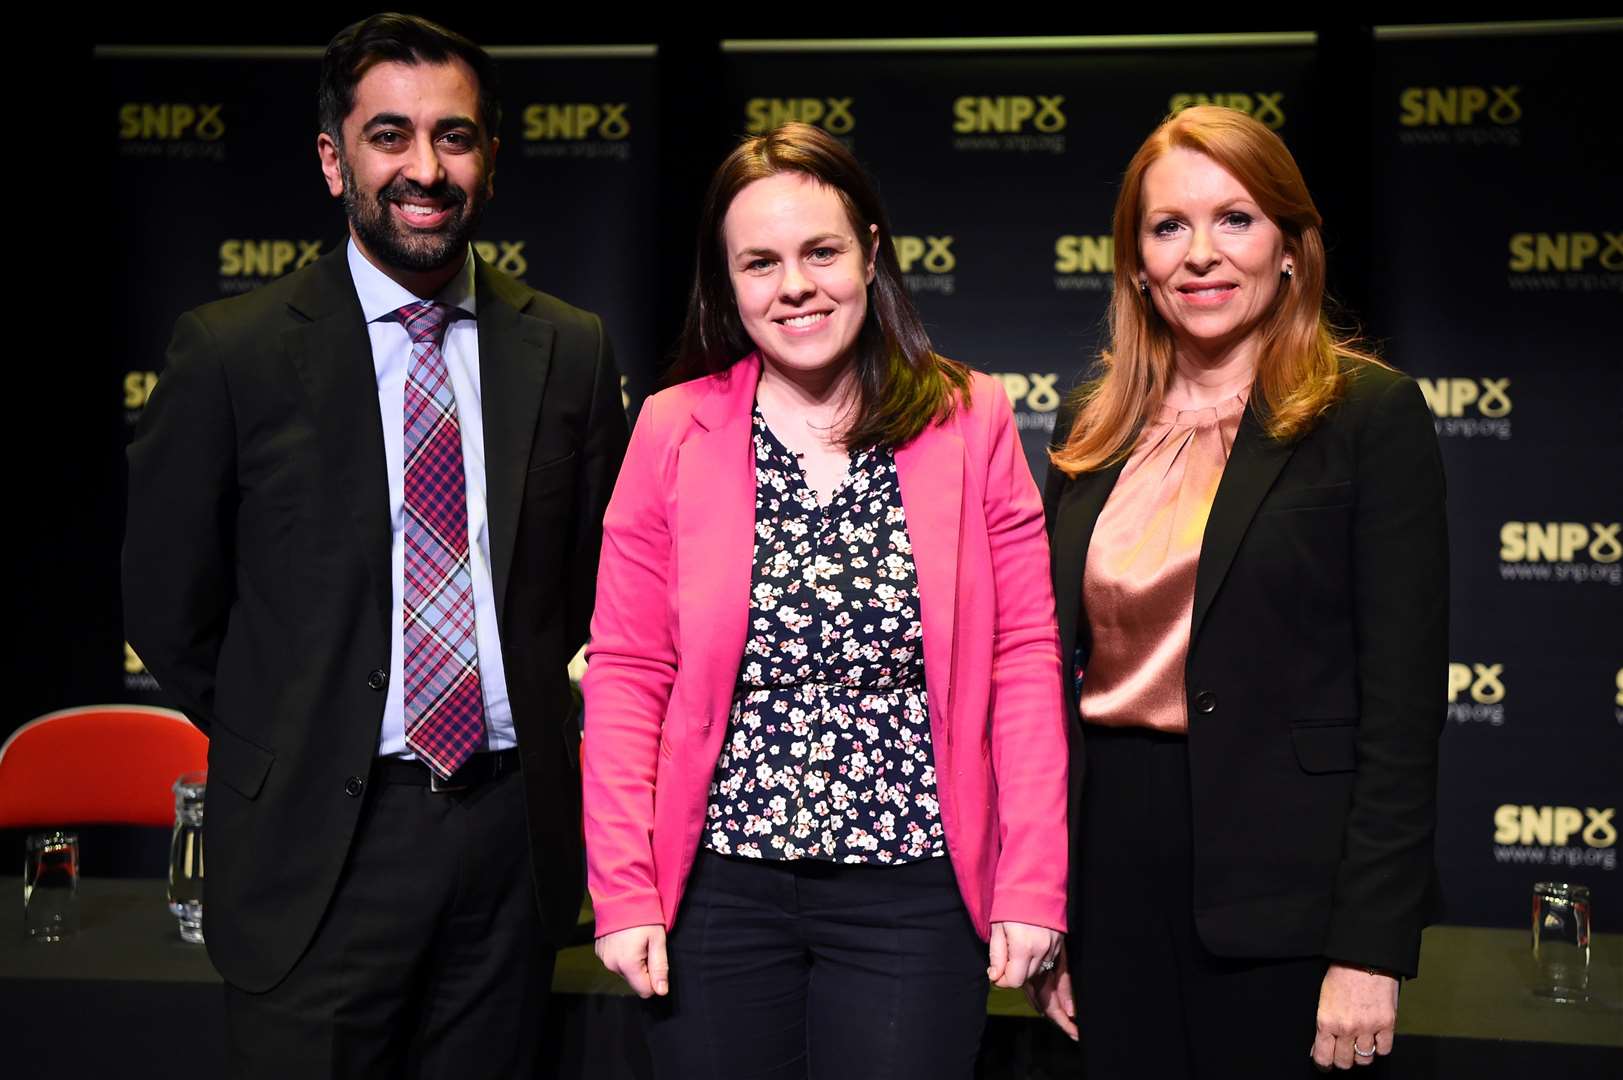 Humza Yousaf (left), Kate Forbes (centre) and Ash regan (right) are all running to be the next SNP leader and Scottish first minister. (Andy Buchanan/PA)